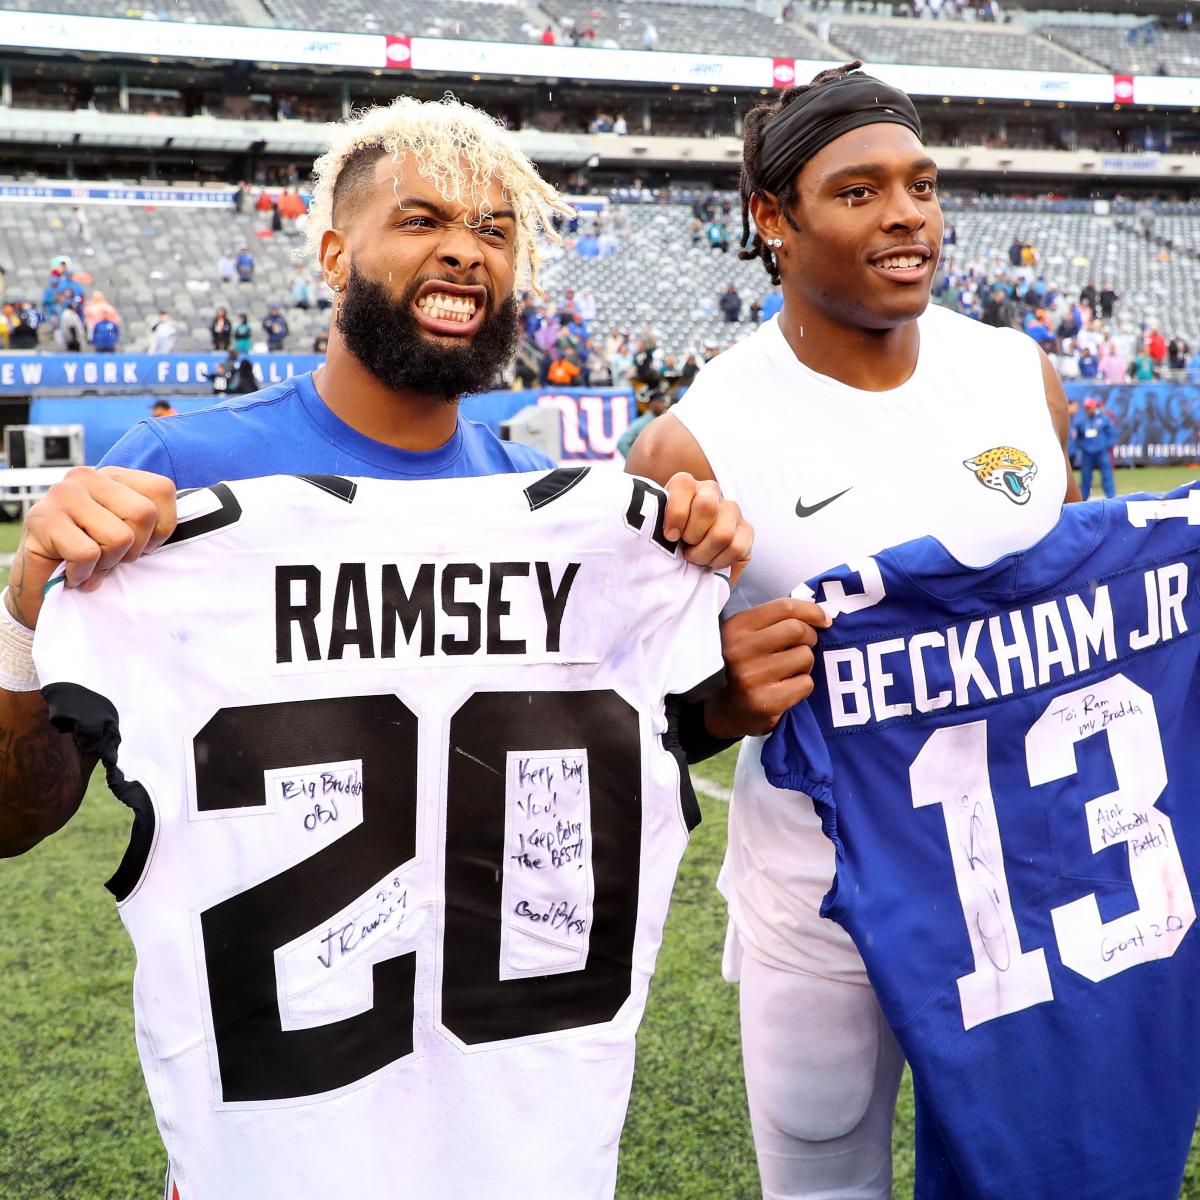 Swapping jerseys after games all the rage among NFL players